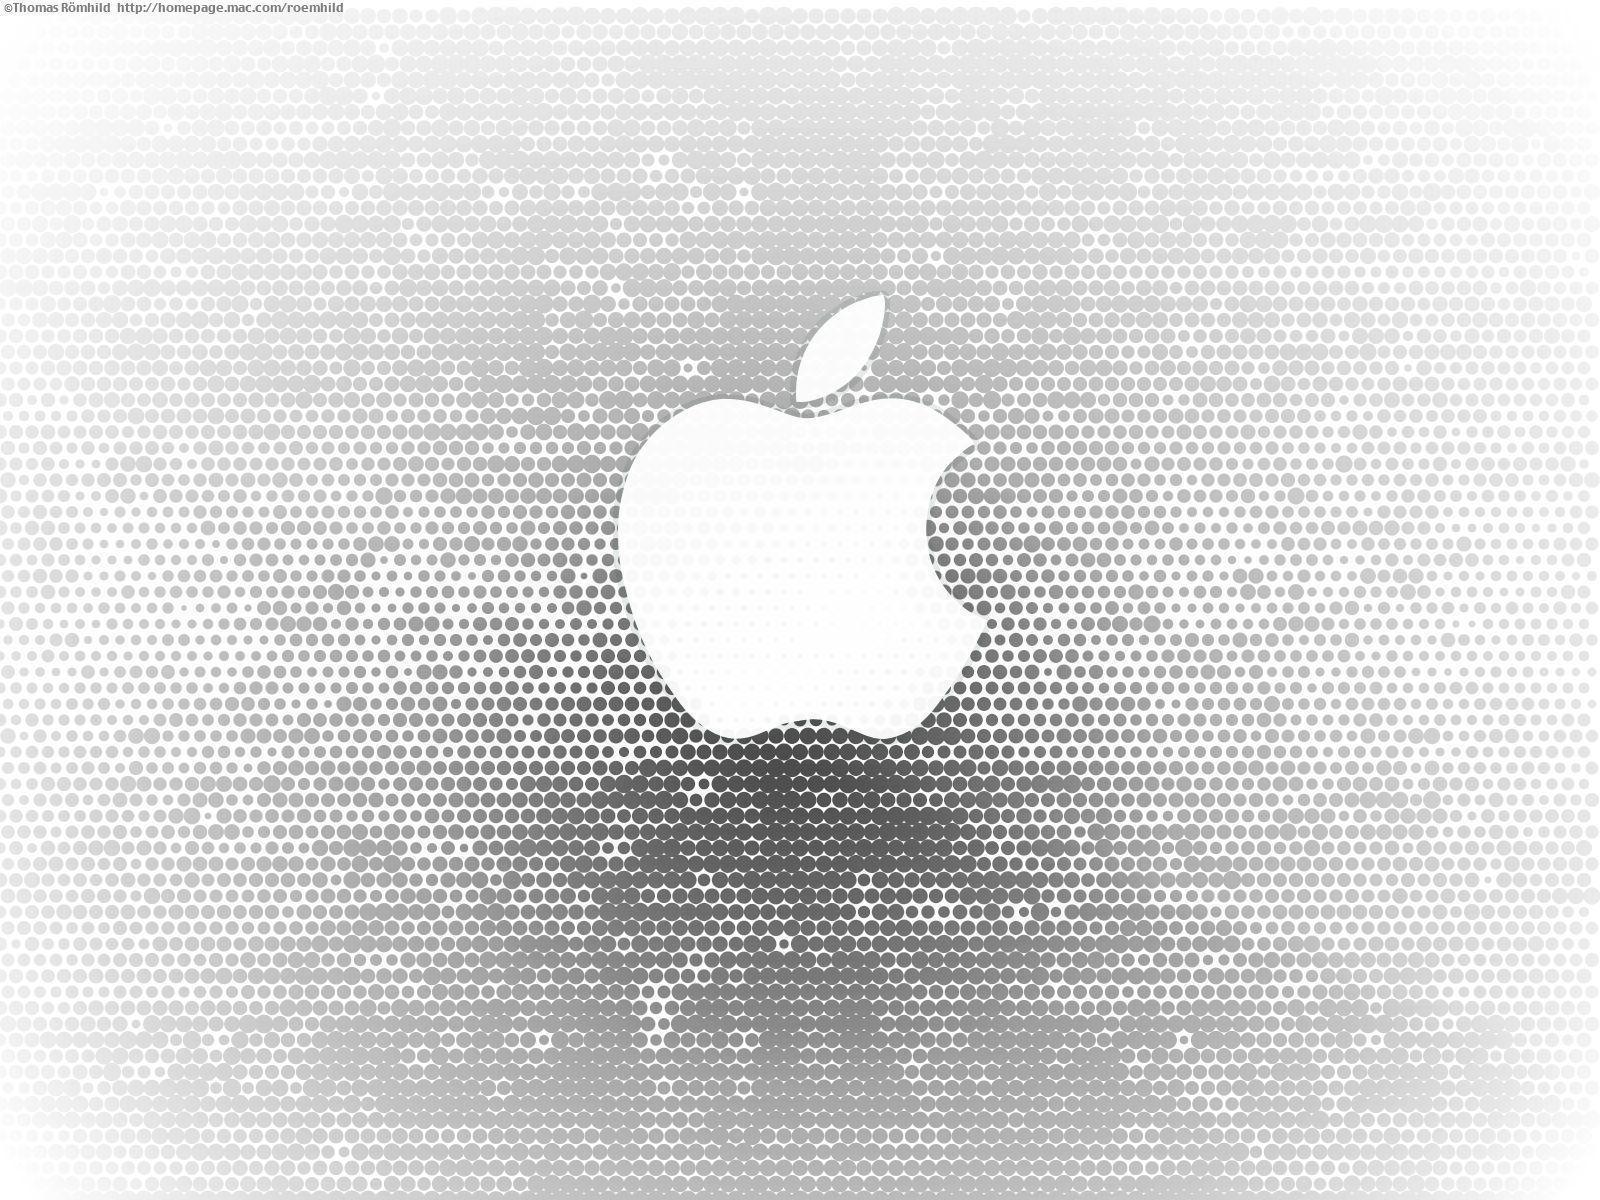 White Apple logo with dots